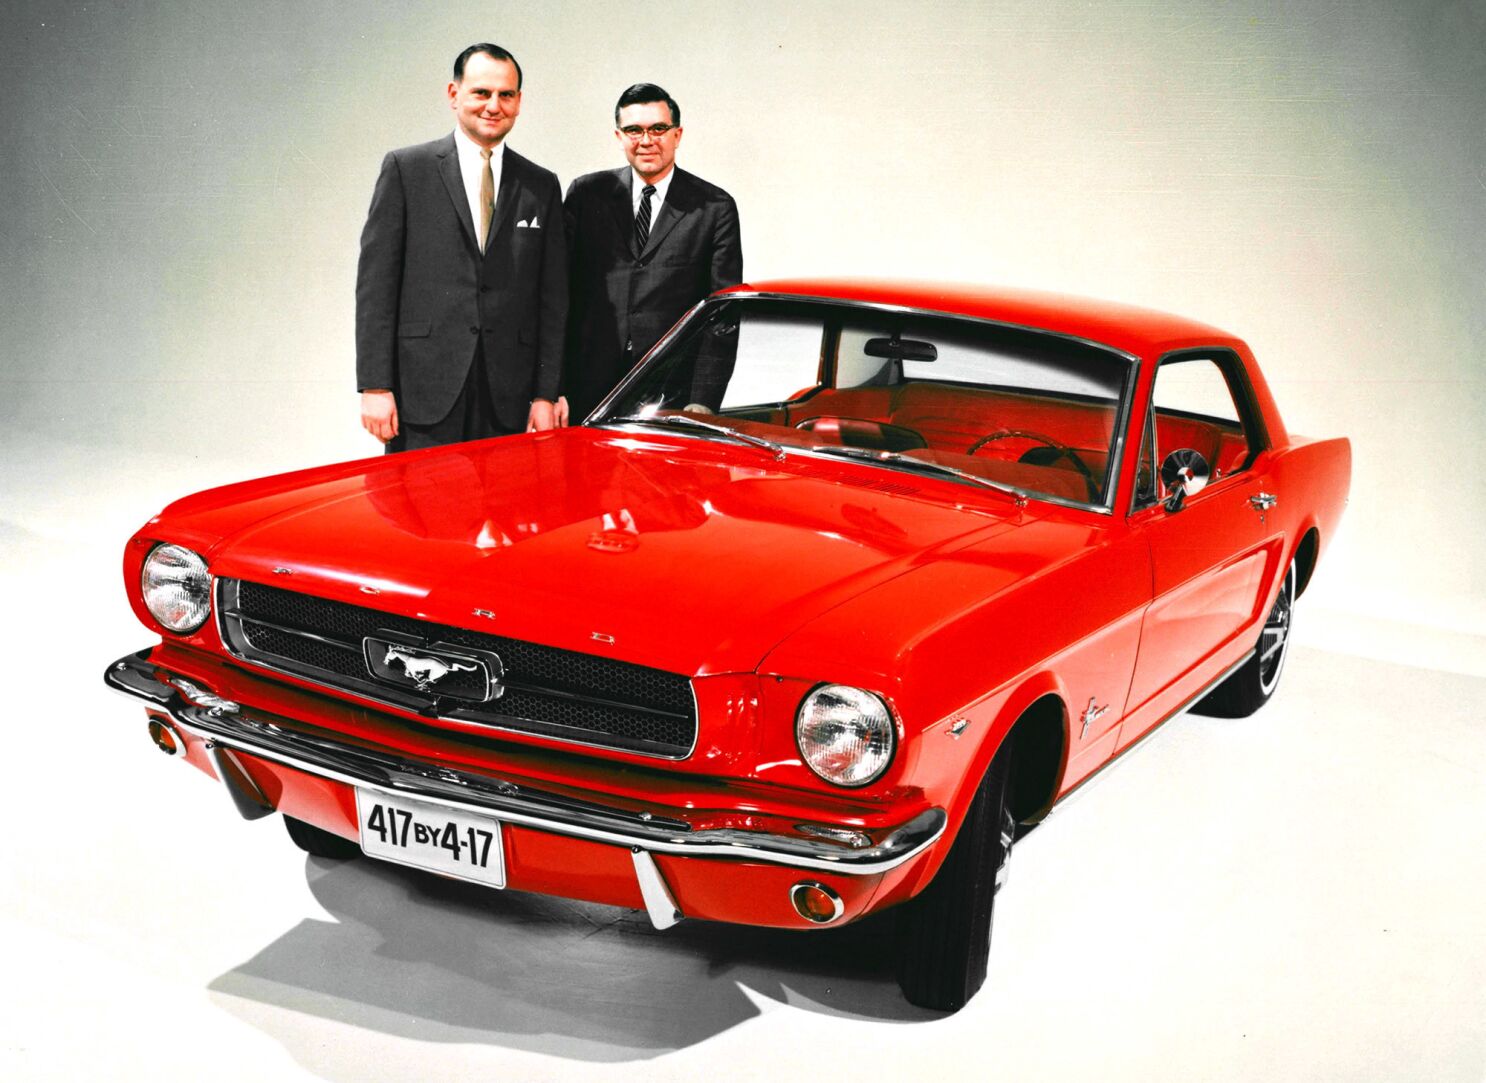 Lee Iacocca, father of the Ford Mustang who later rescued Chrysler, dies at  94 - Los Angeles Times